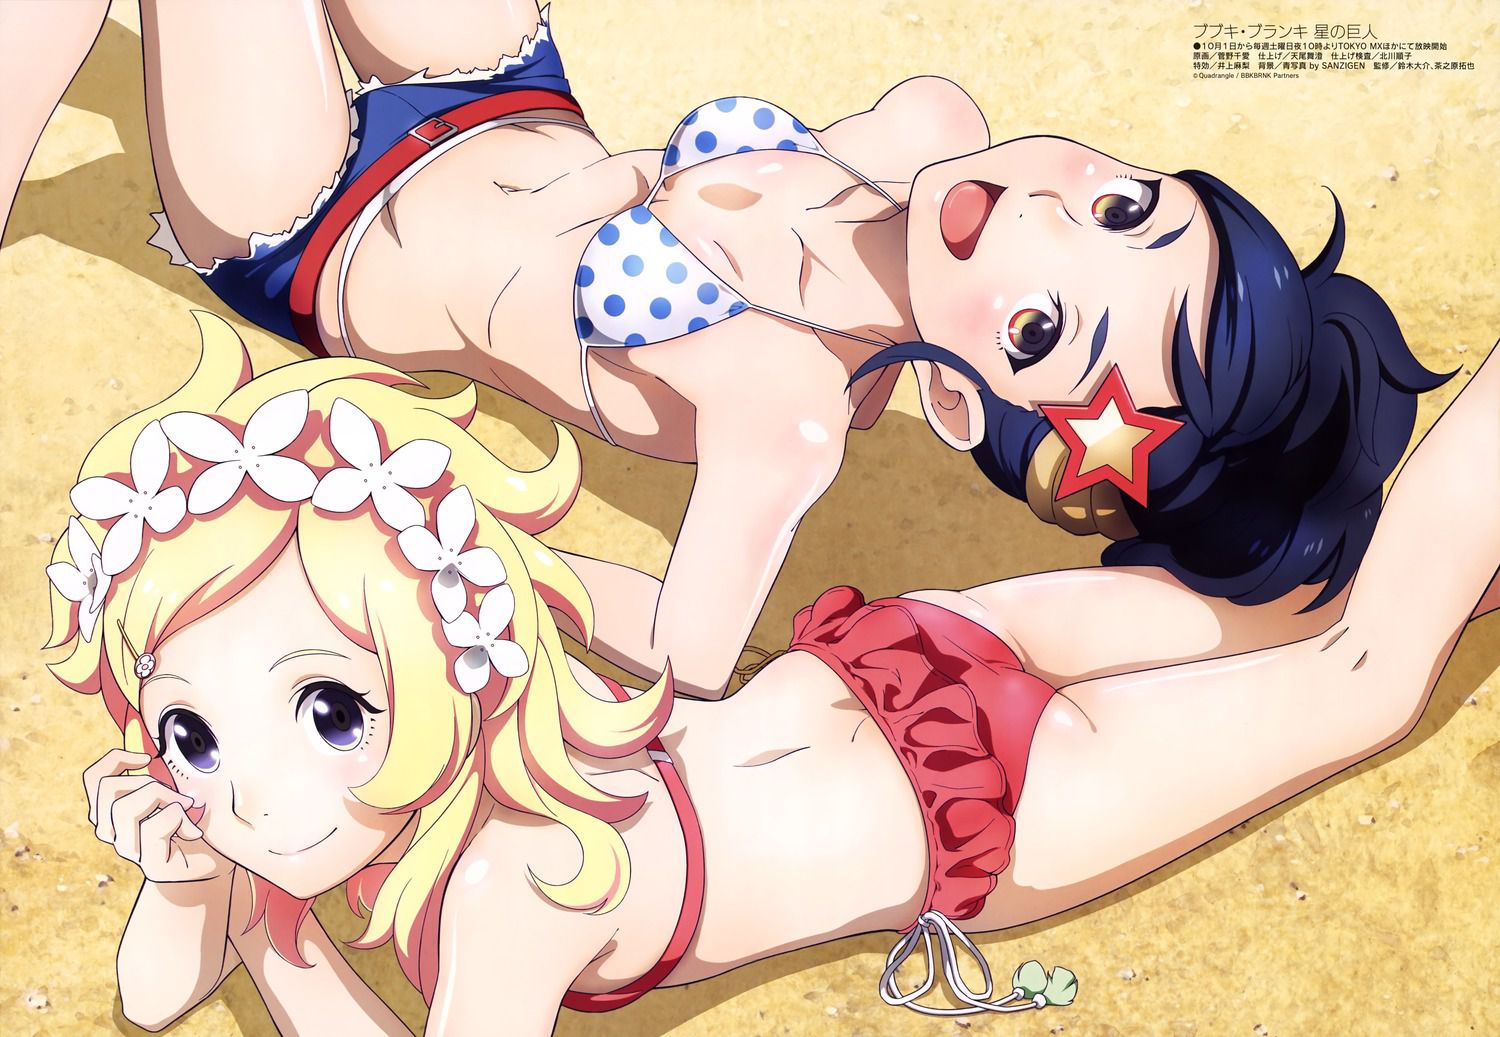 [Image] the latest pin-up girl anime such as sword online erotic babe too wwwwwwwww 5